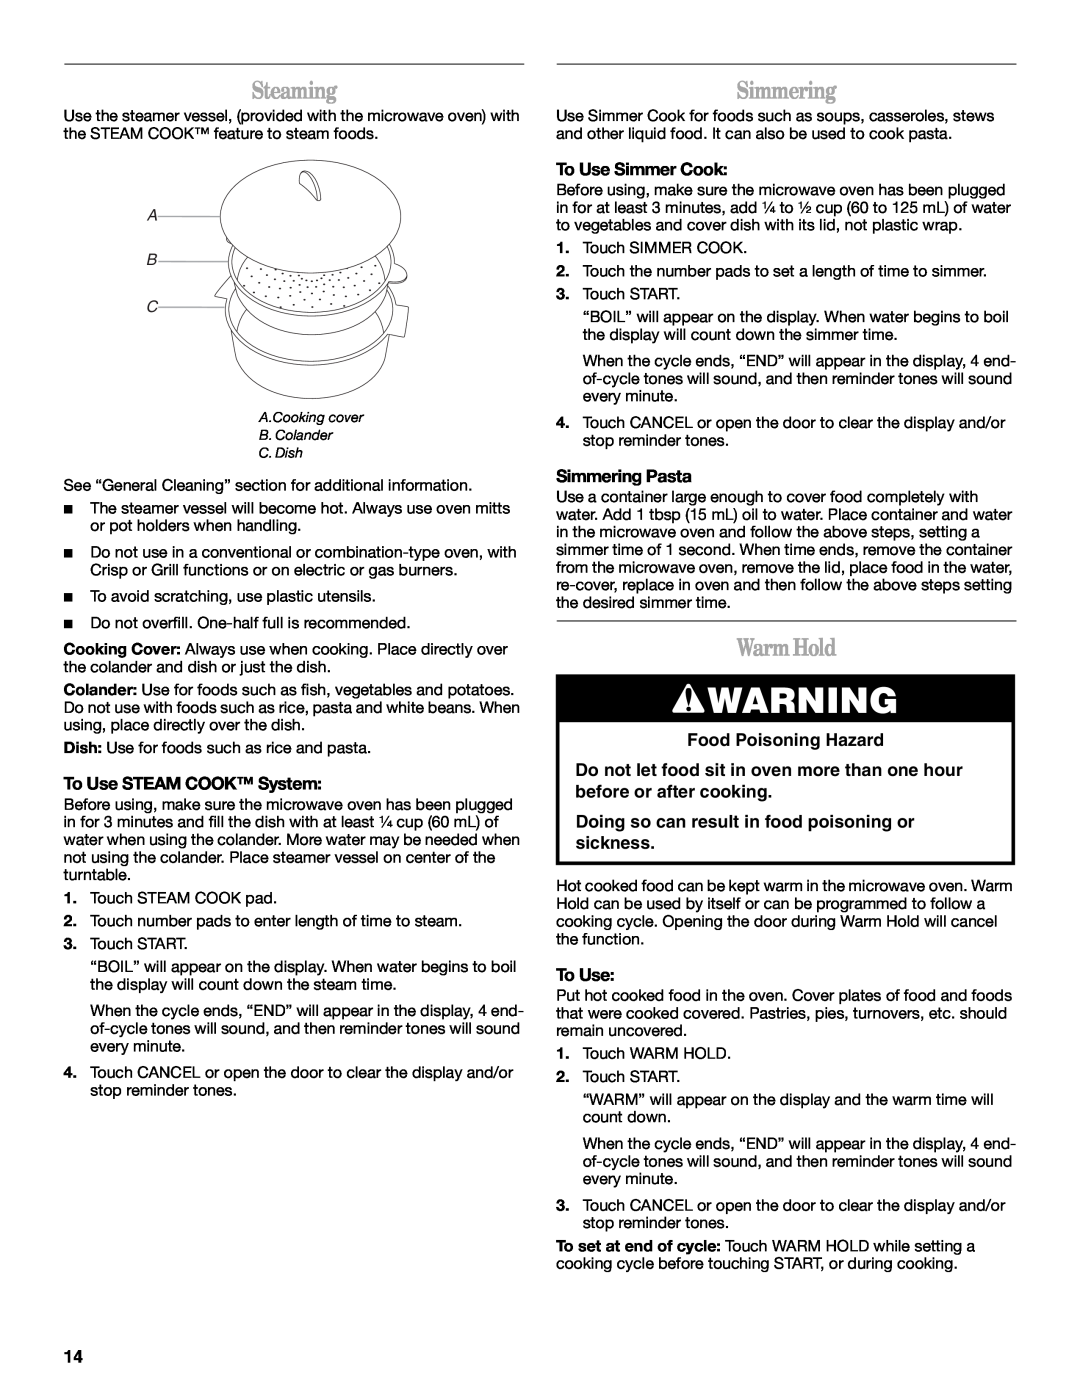 Whirlpool GH4155XP manual Steaming, Simmering, Warm Hold, Food Poisoning Hazard, A B C 